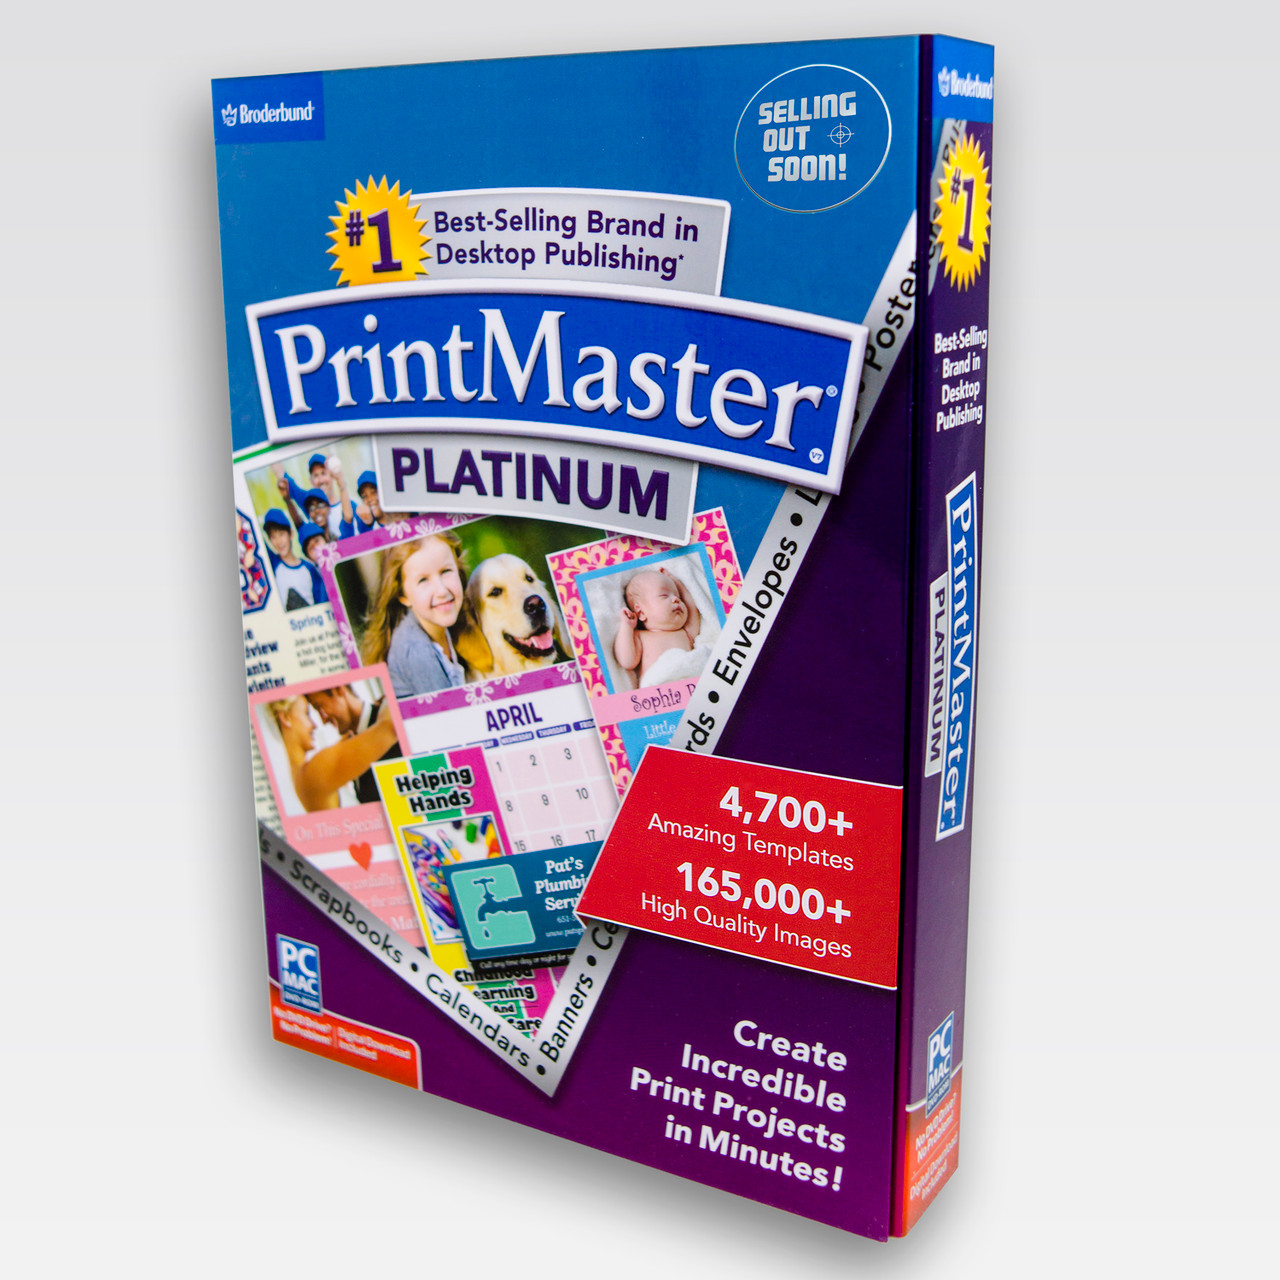 when was printmaster platinum 18 released